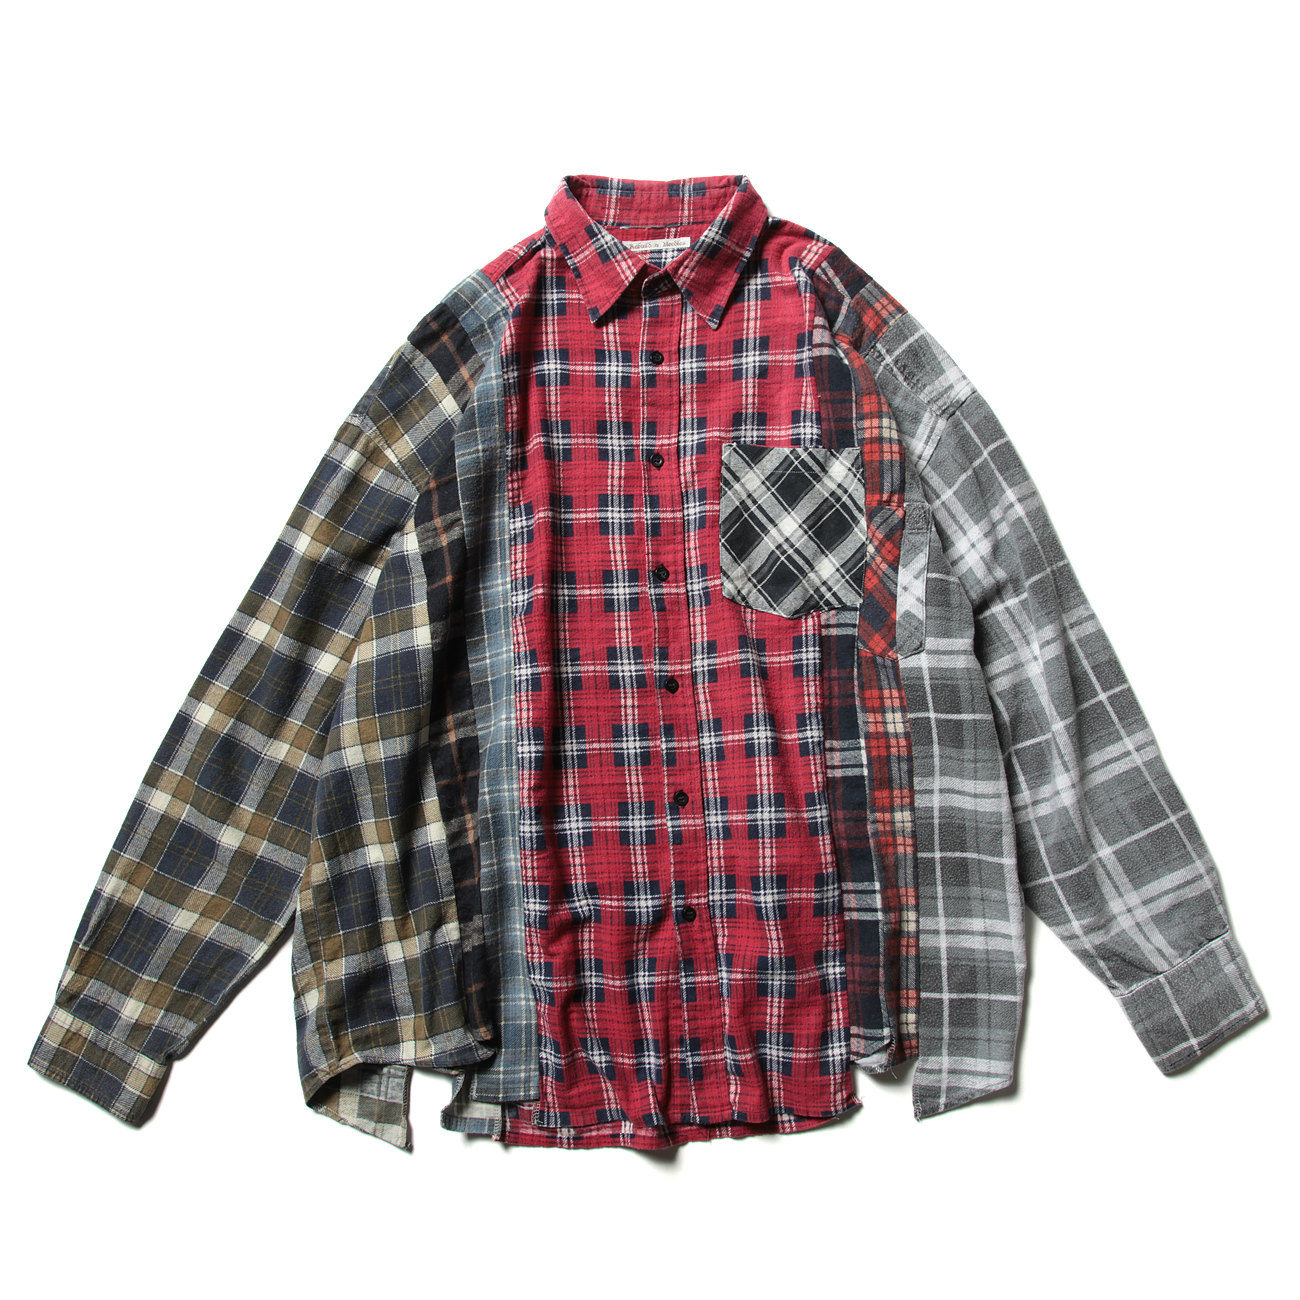 NEEDLES/Rebuild by Needles Flannel Shirt